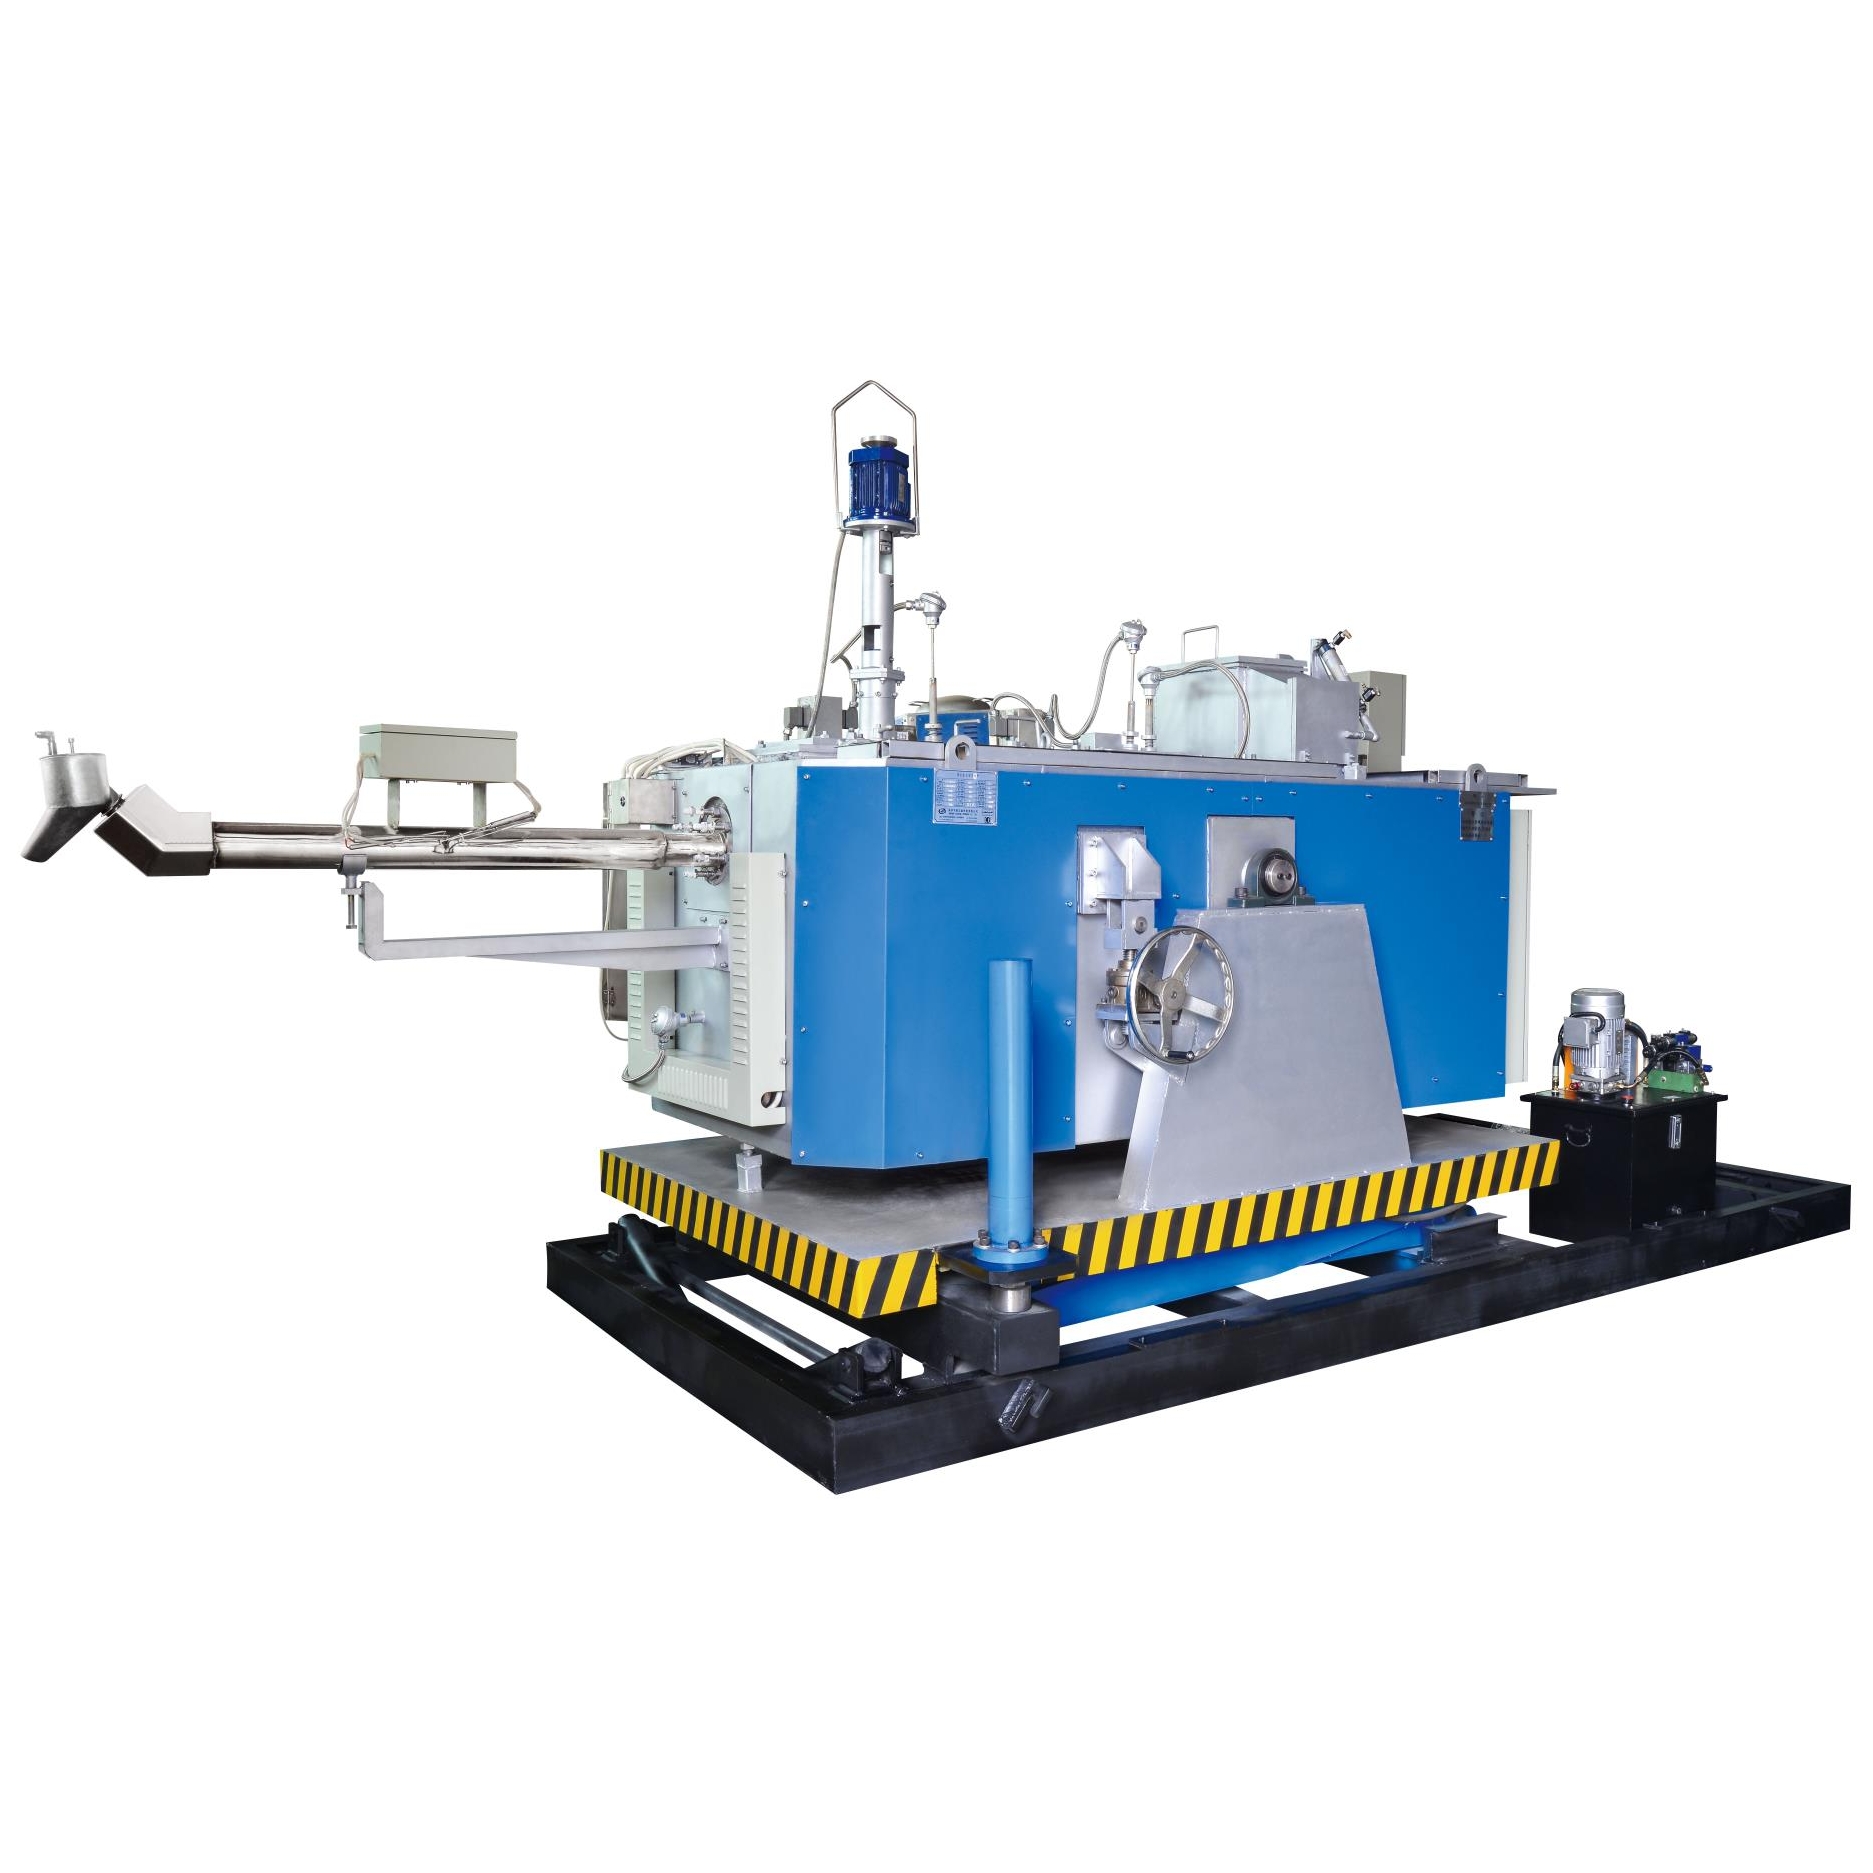 Electrical Magnesium Alloy Dosing Furnace 80kg/h